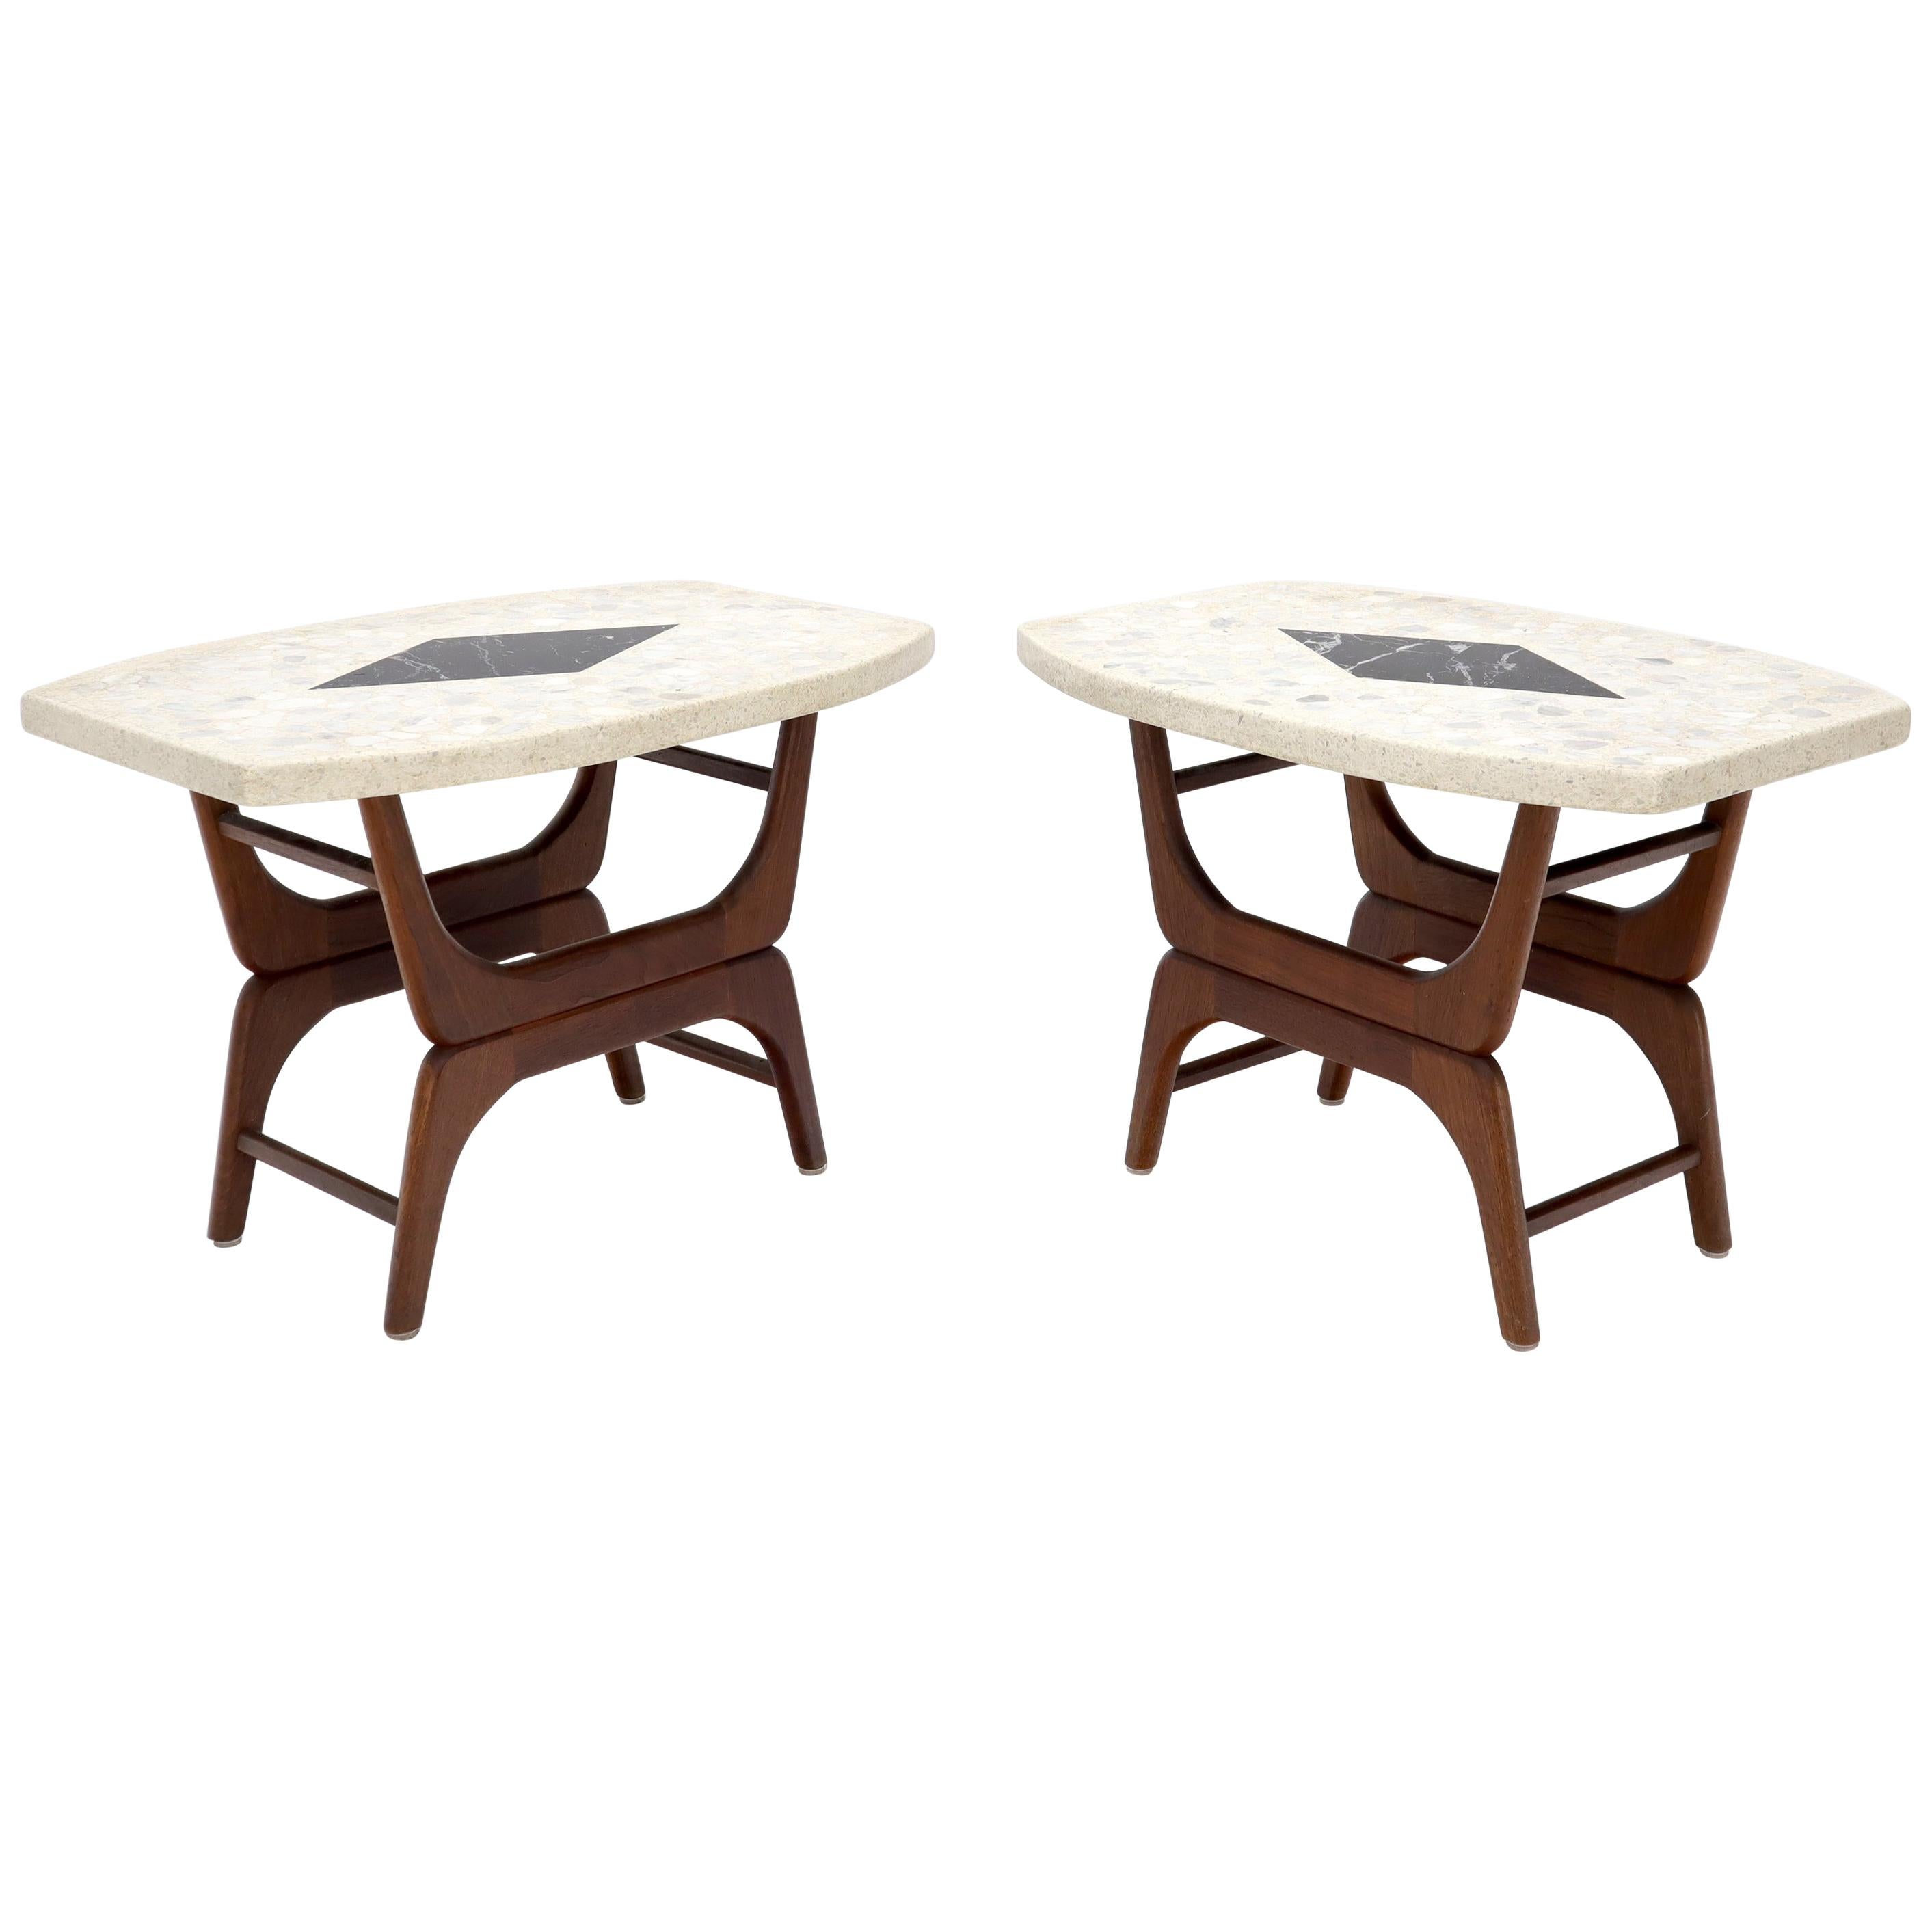 Pair of Inlaid Terrazzo Boat Shape Tops Walnut Bases End Side Tables